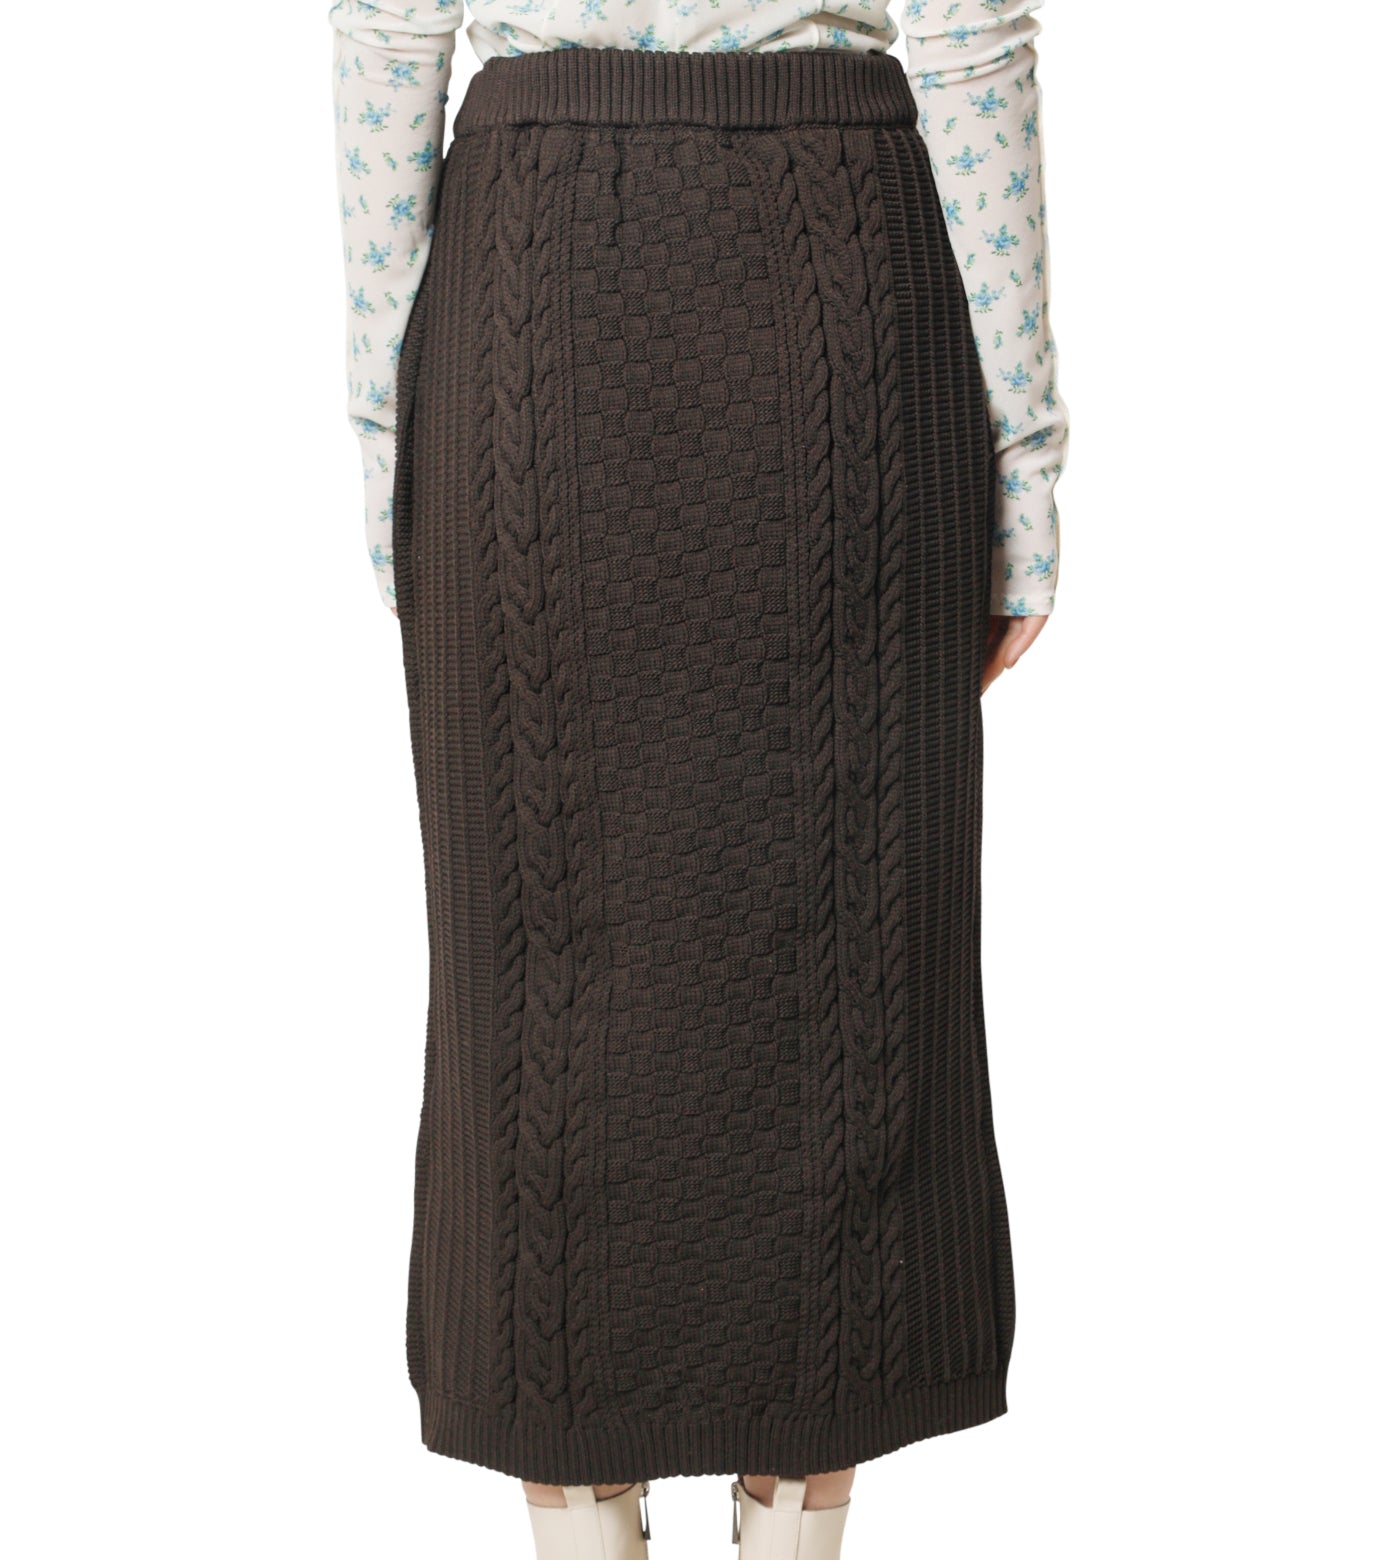 Chanky Cable Knit Skirt